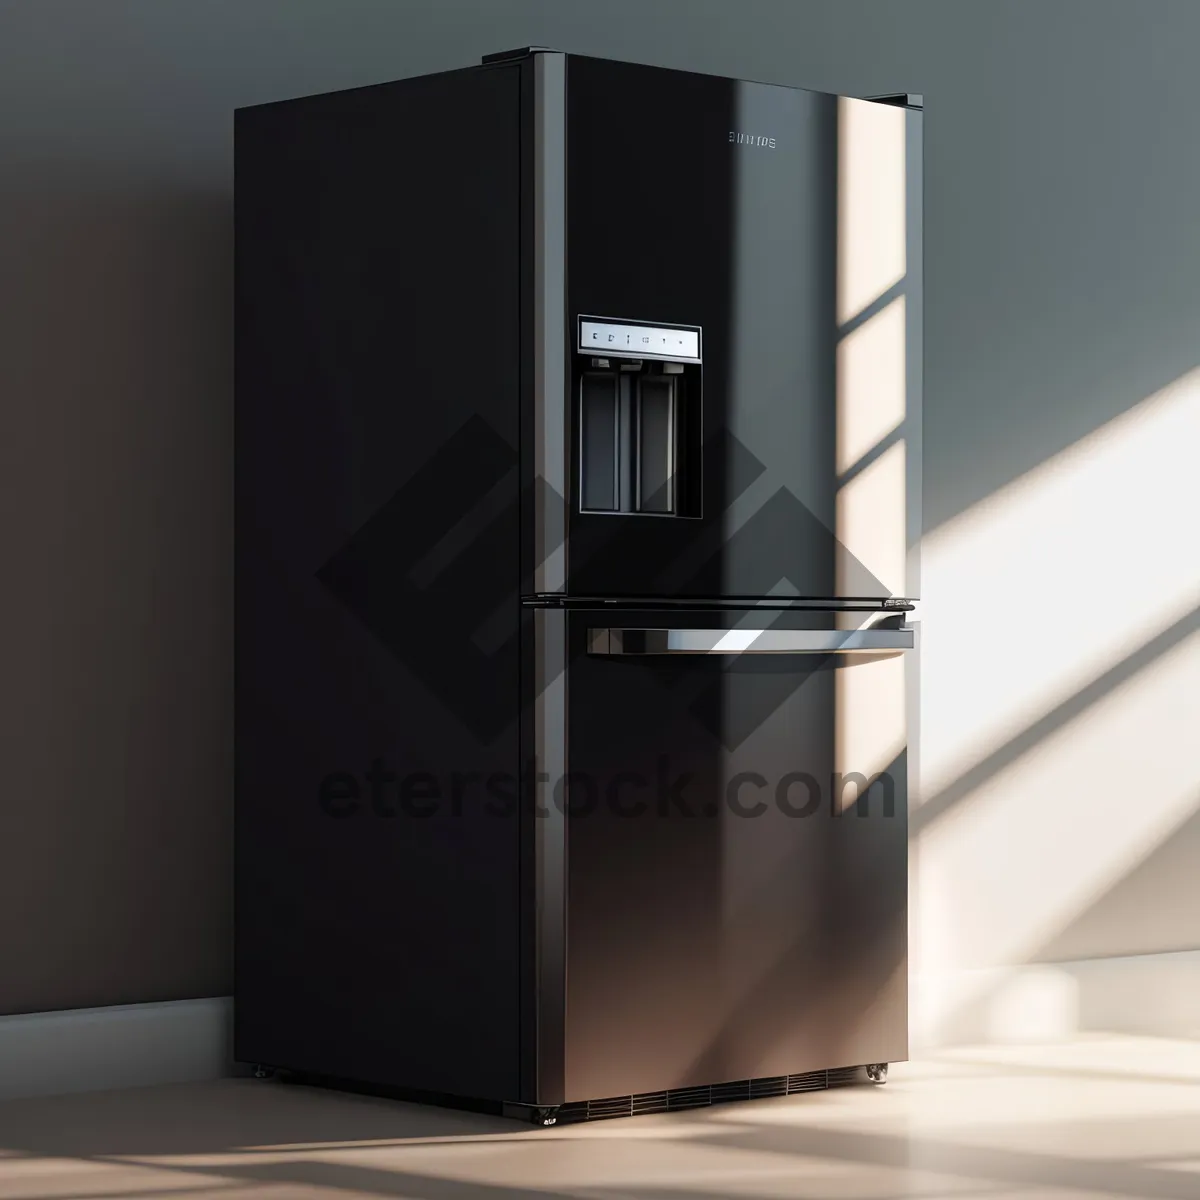 Picture of Modern white goods refrigerator in a furnished room